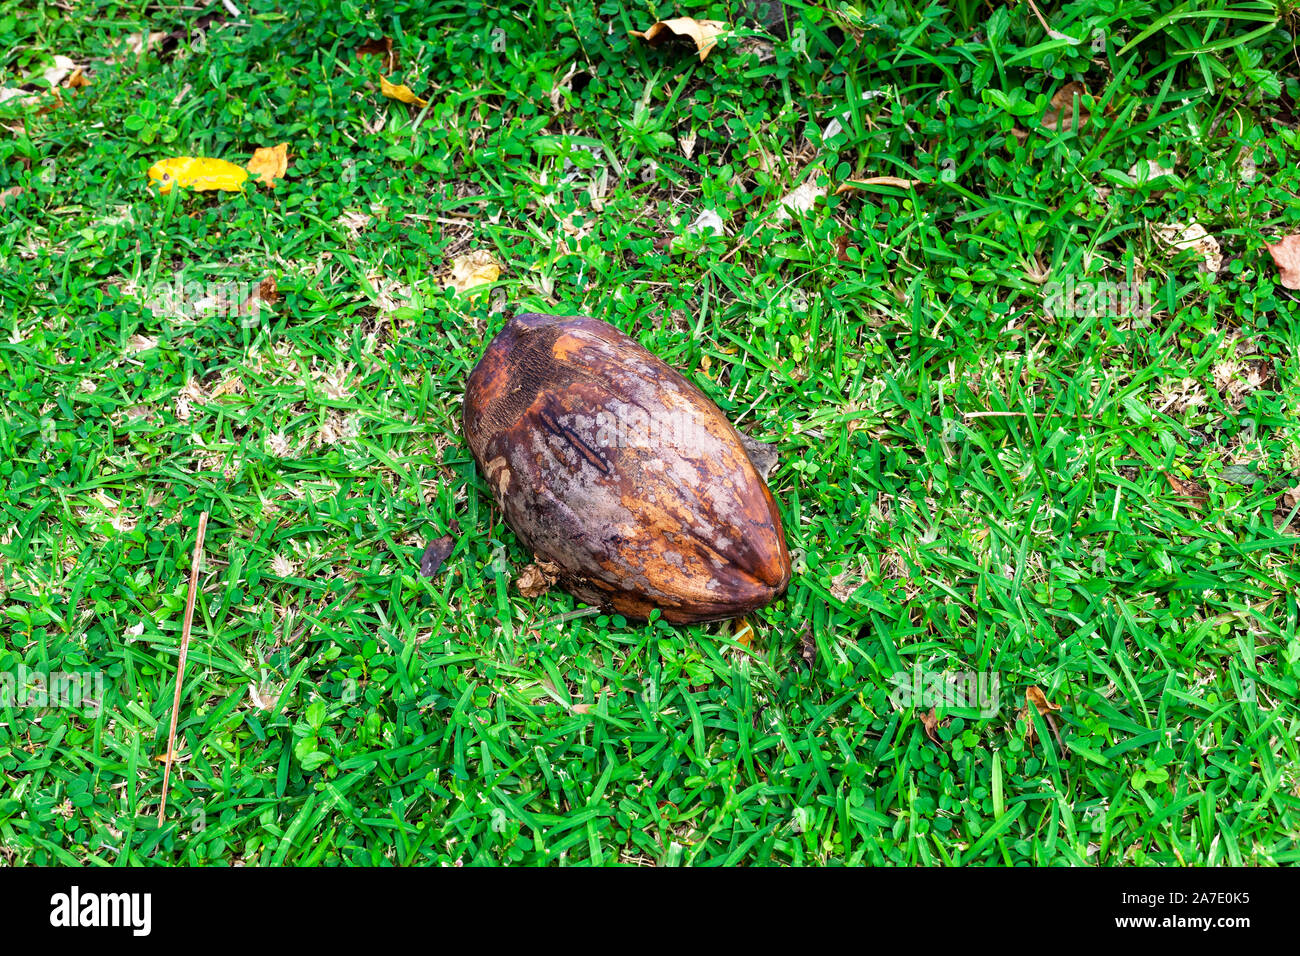 A coconut on the ground in French Polynesia Stock Photo